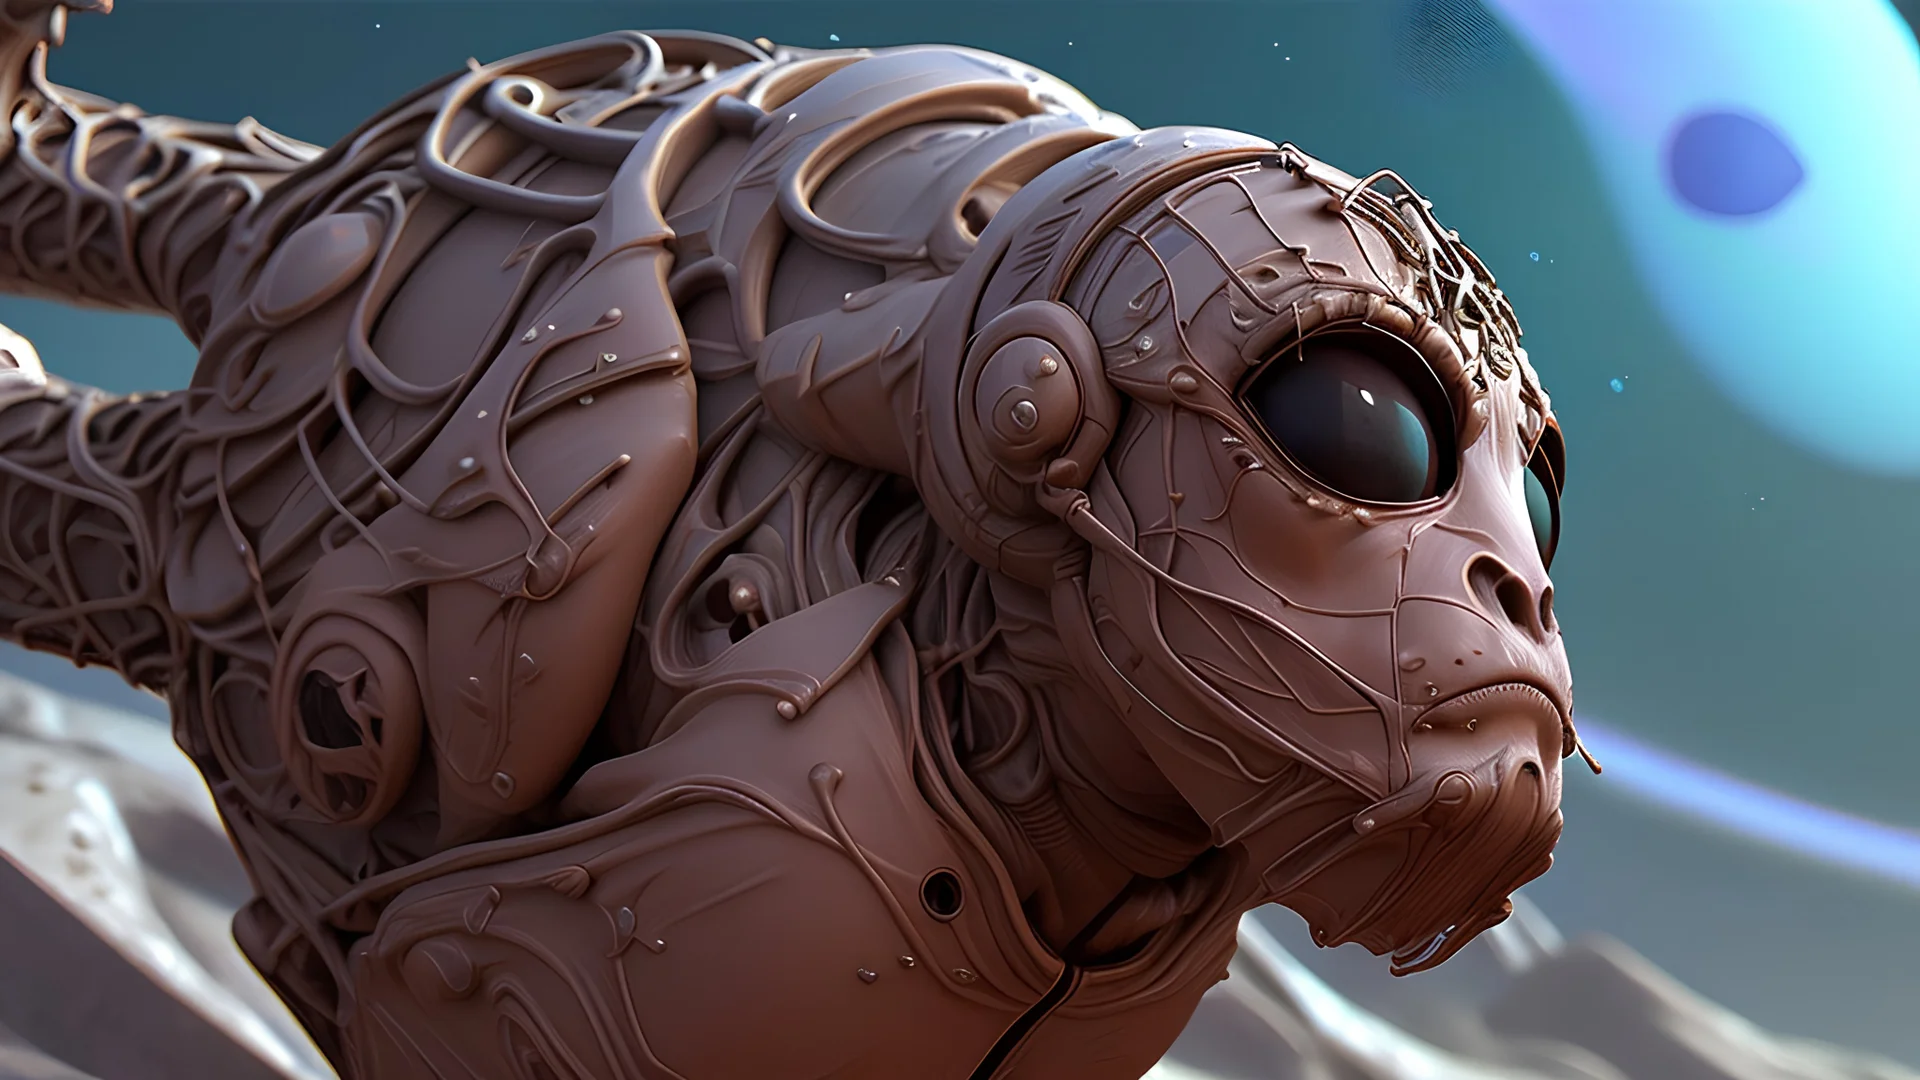 Expressively detailed and intricate 3d rendering of a hyperrealistic Zbrush sculpt, high detail realistic cloth, concept art, Zbrush high detail, pinterest Creature Zbrush HD sculpt, neutral lighting, 8k detail: Astronaut explores space being desert planet. Astronaut space suit performing extra cosmic activity space against stars and planets background. cyberpunk, neon, vines, flying insect, front view, dripping colorful paint, tribalism, gothic, shamanism, cosmic fractals, dystopian, dendritic